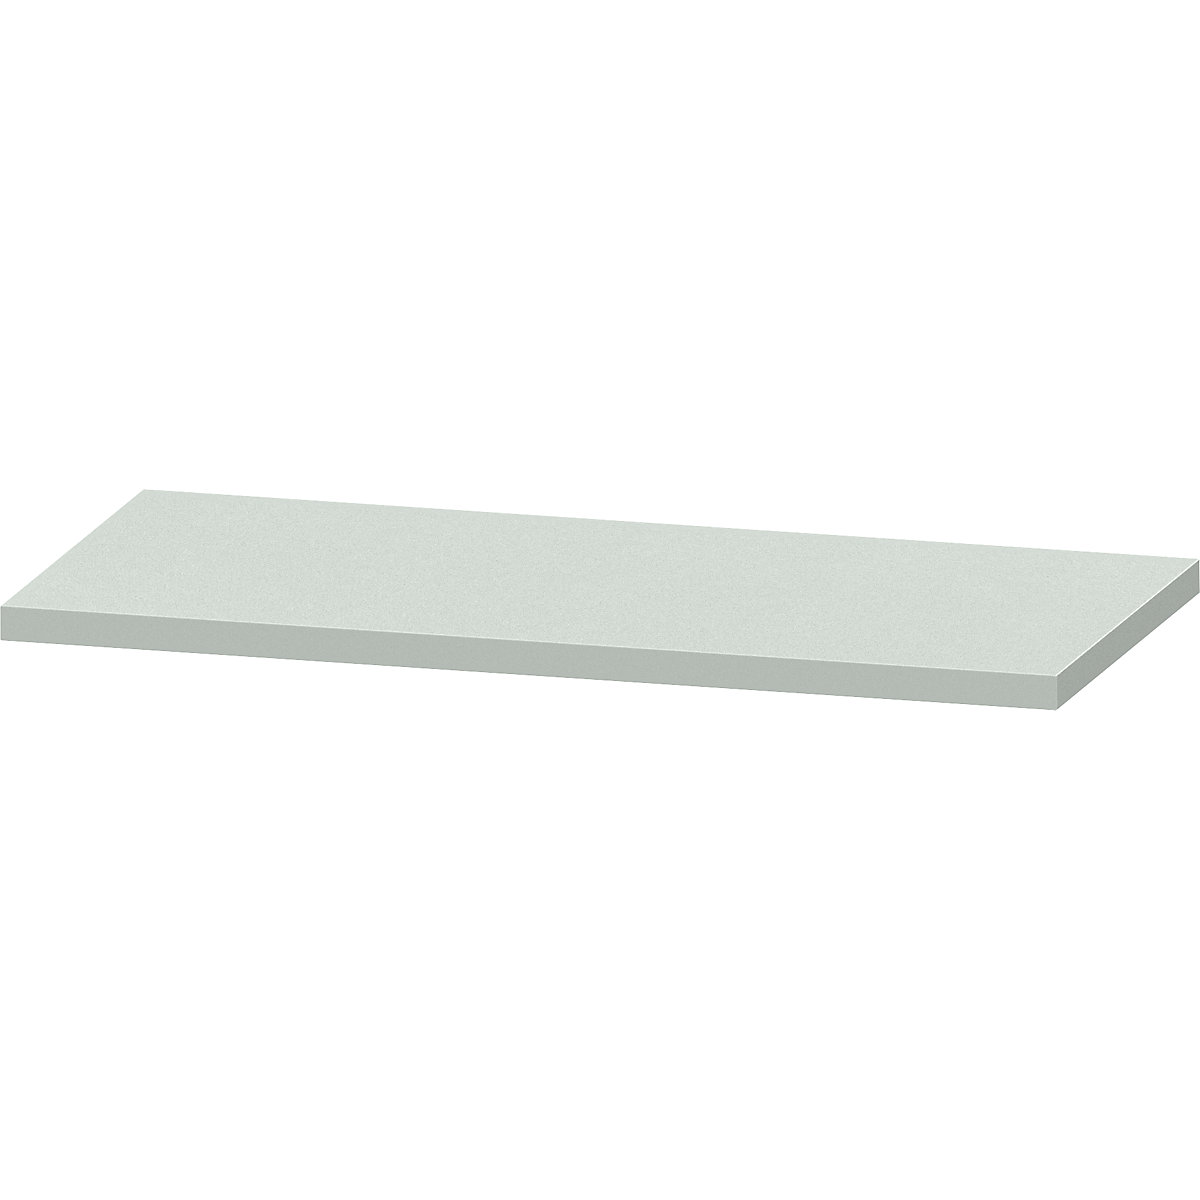 Worktop for workbench – ANKE, sheet steel covered worktop, width 1500 mm, thickness 50 mm-6